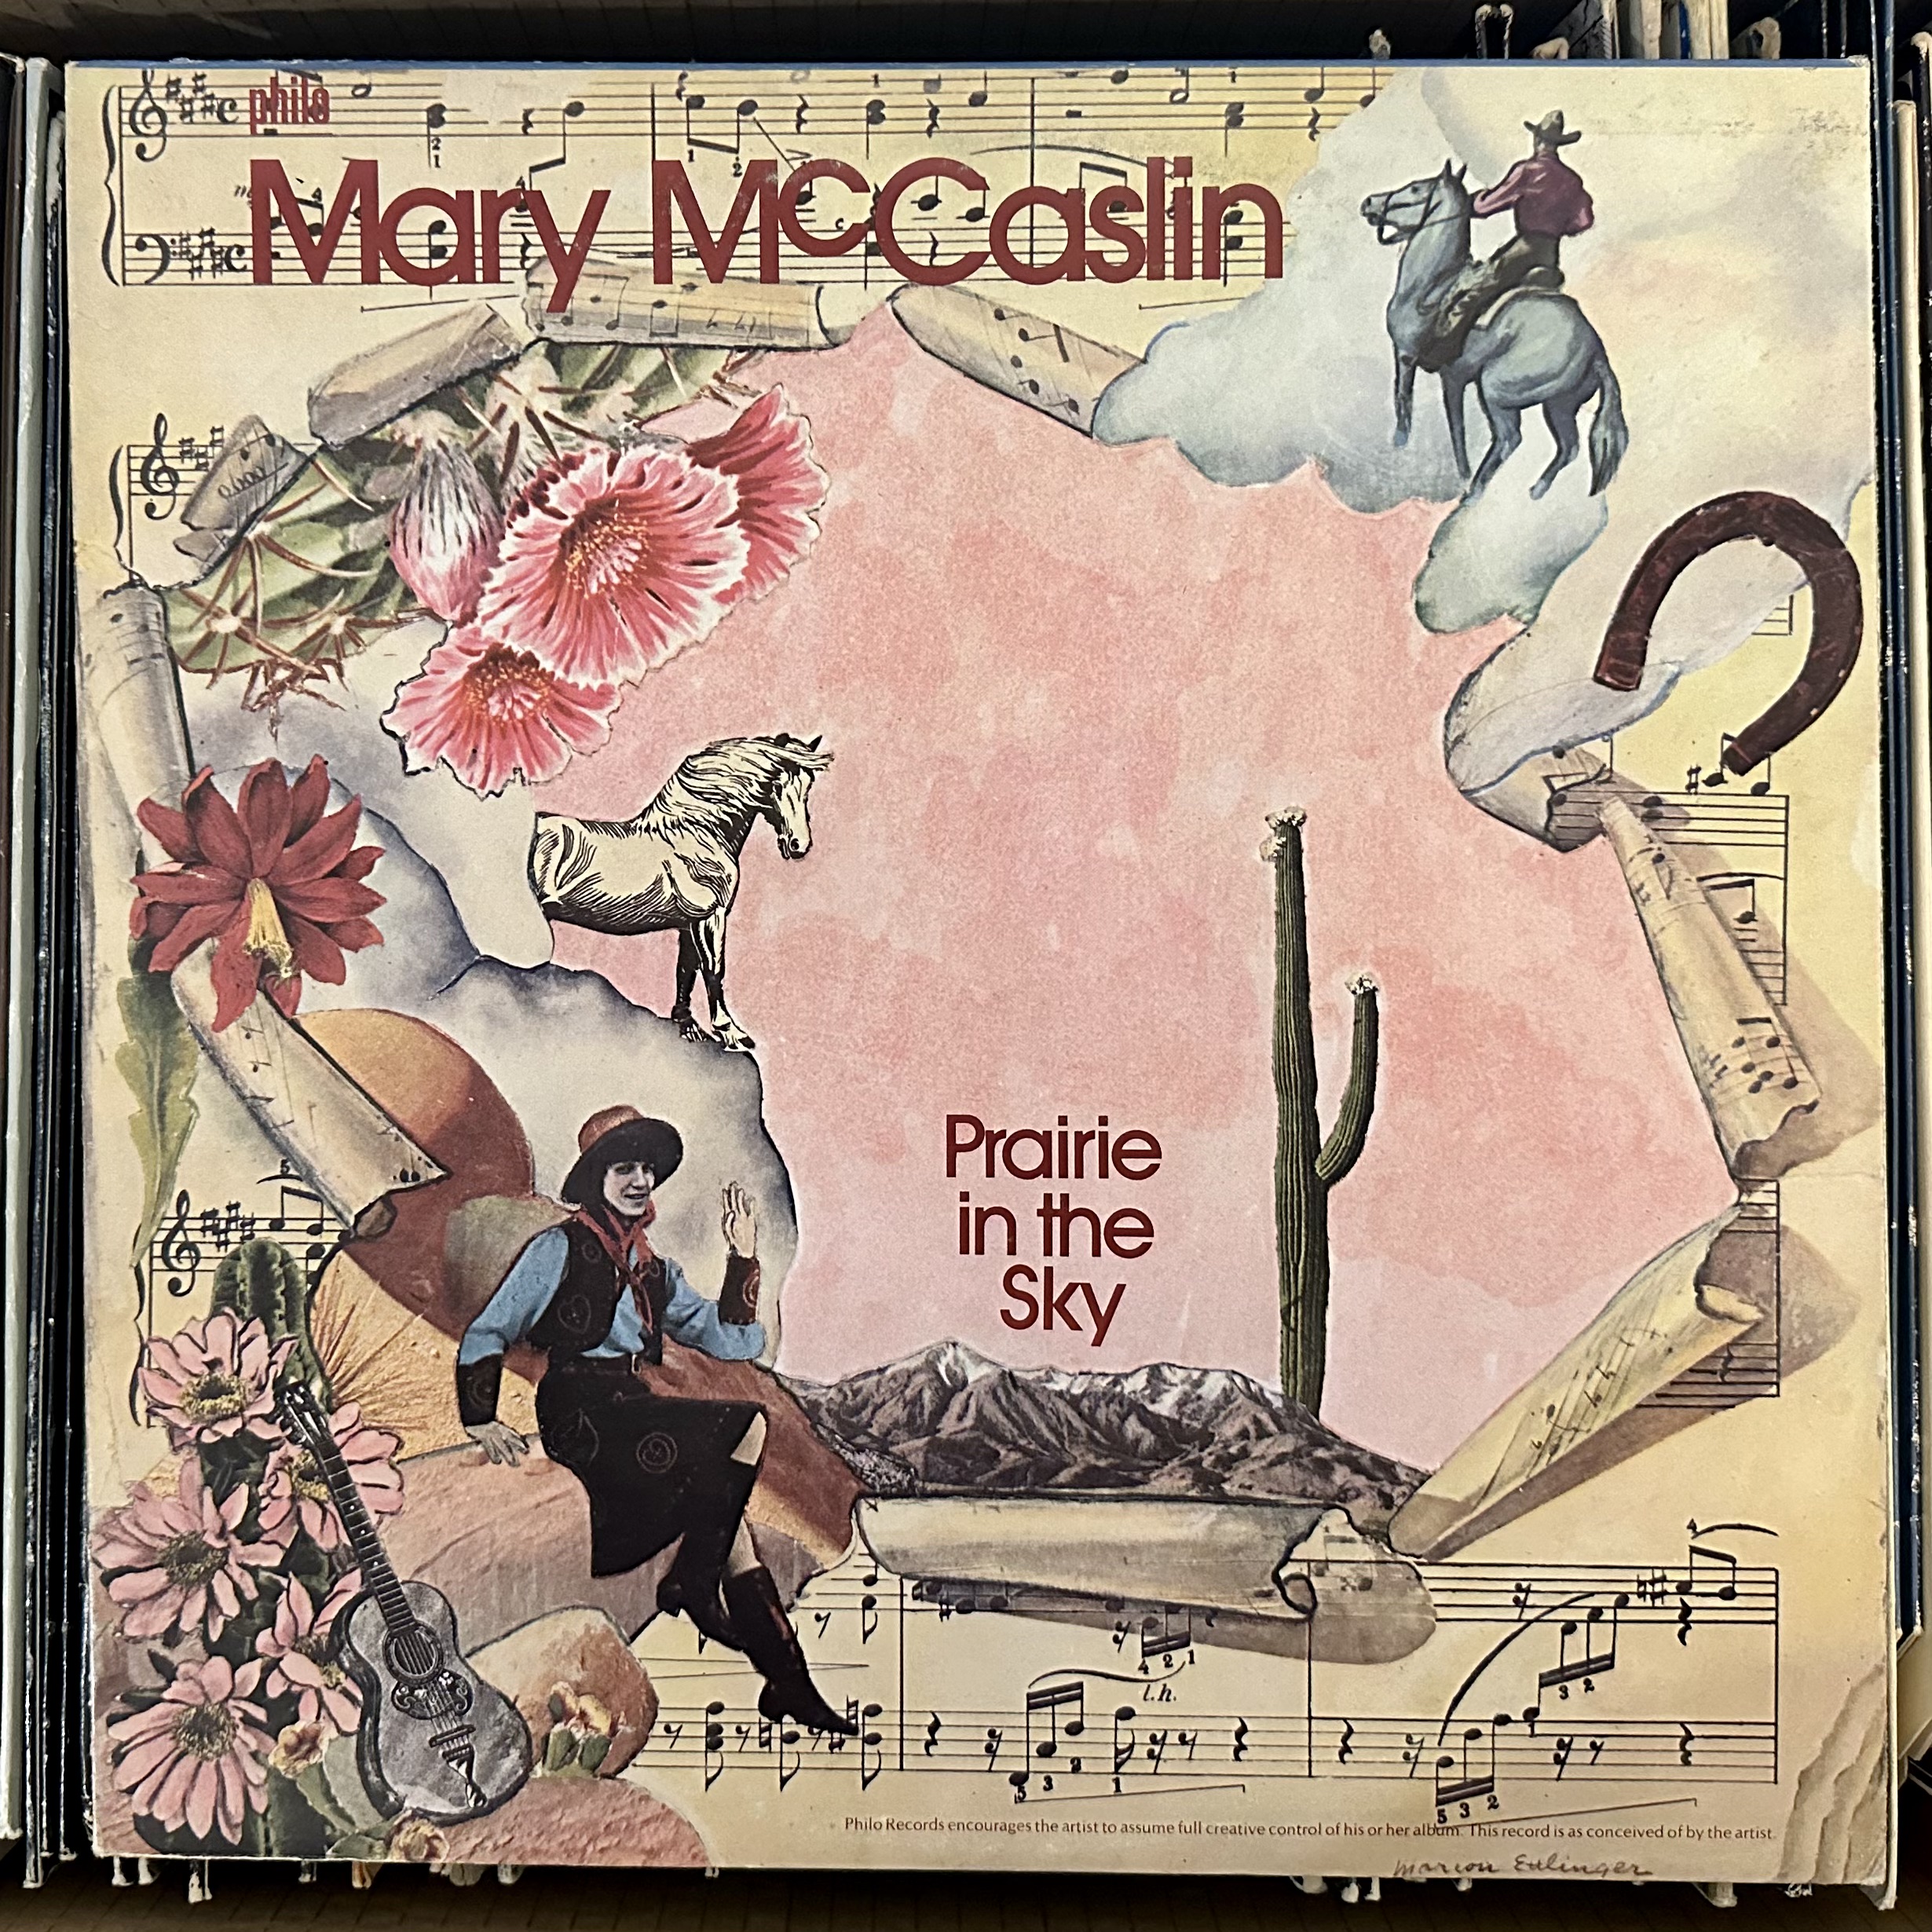 Prairie In The Sky by Mary McCaslin